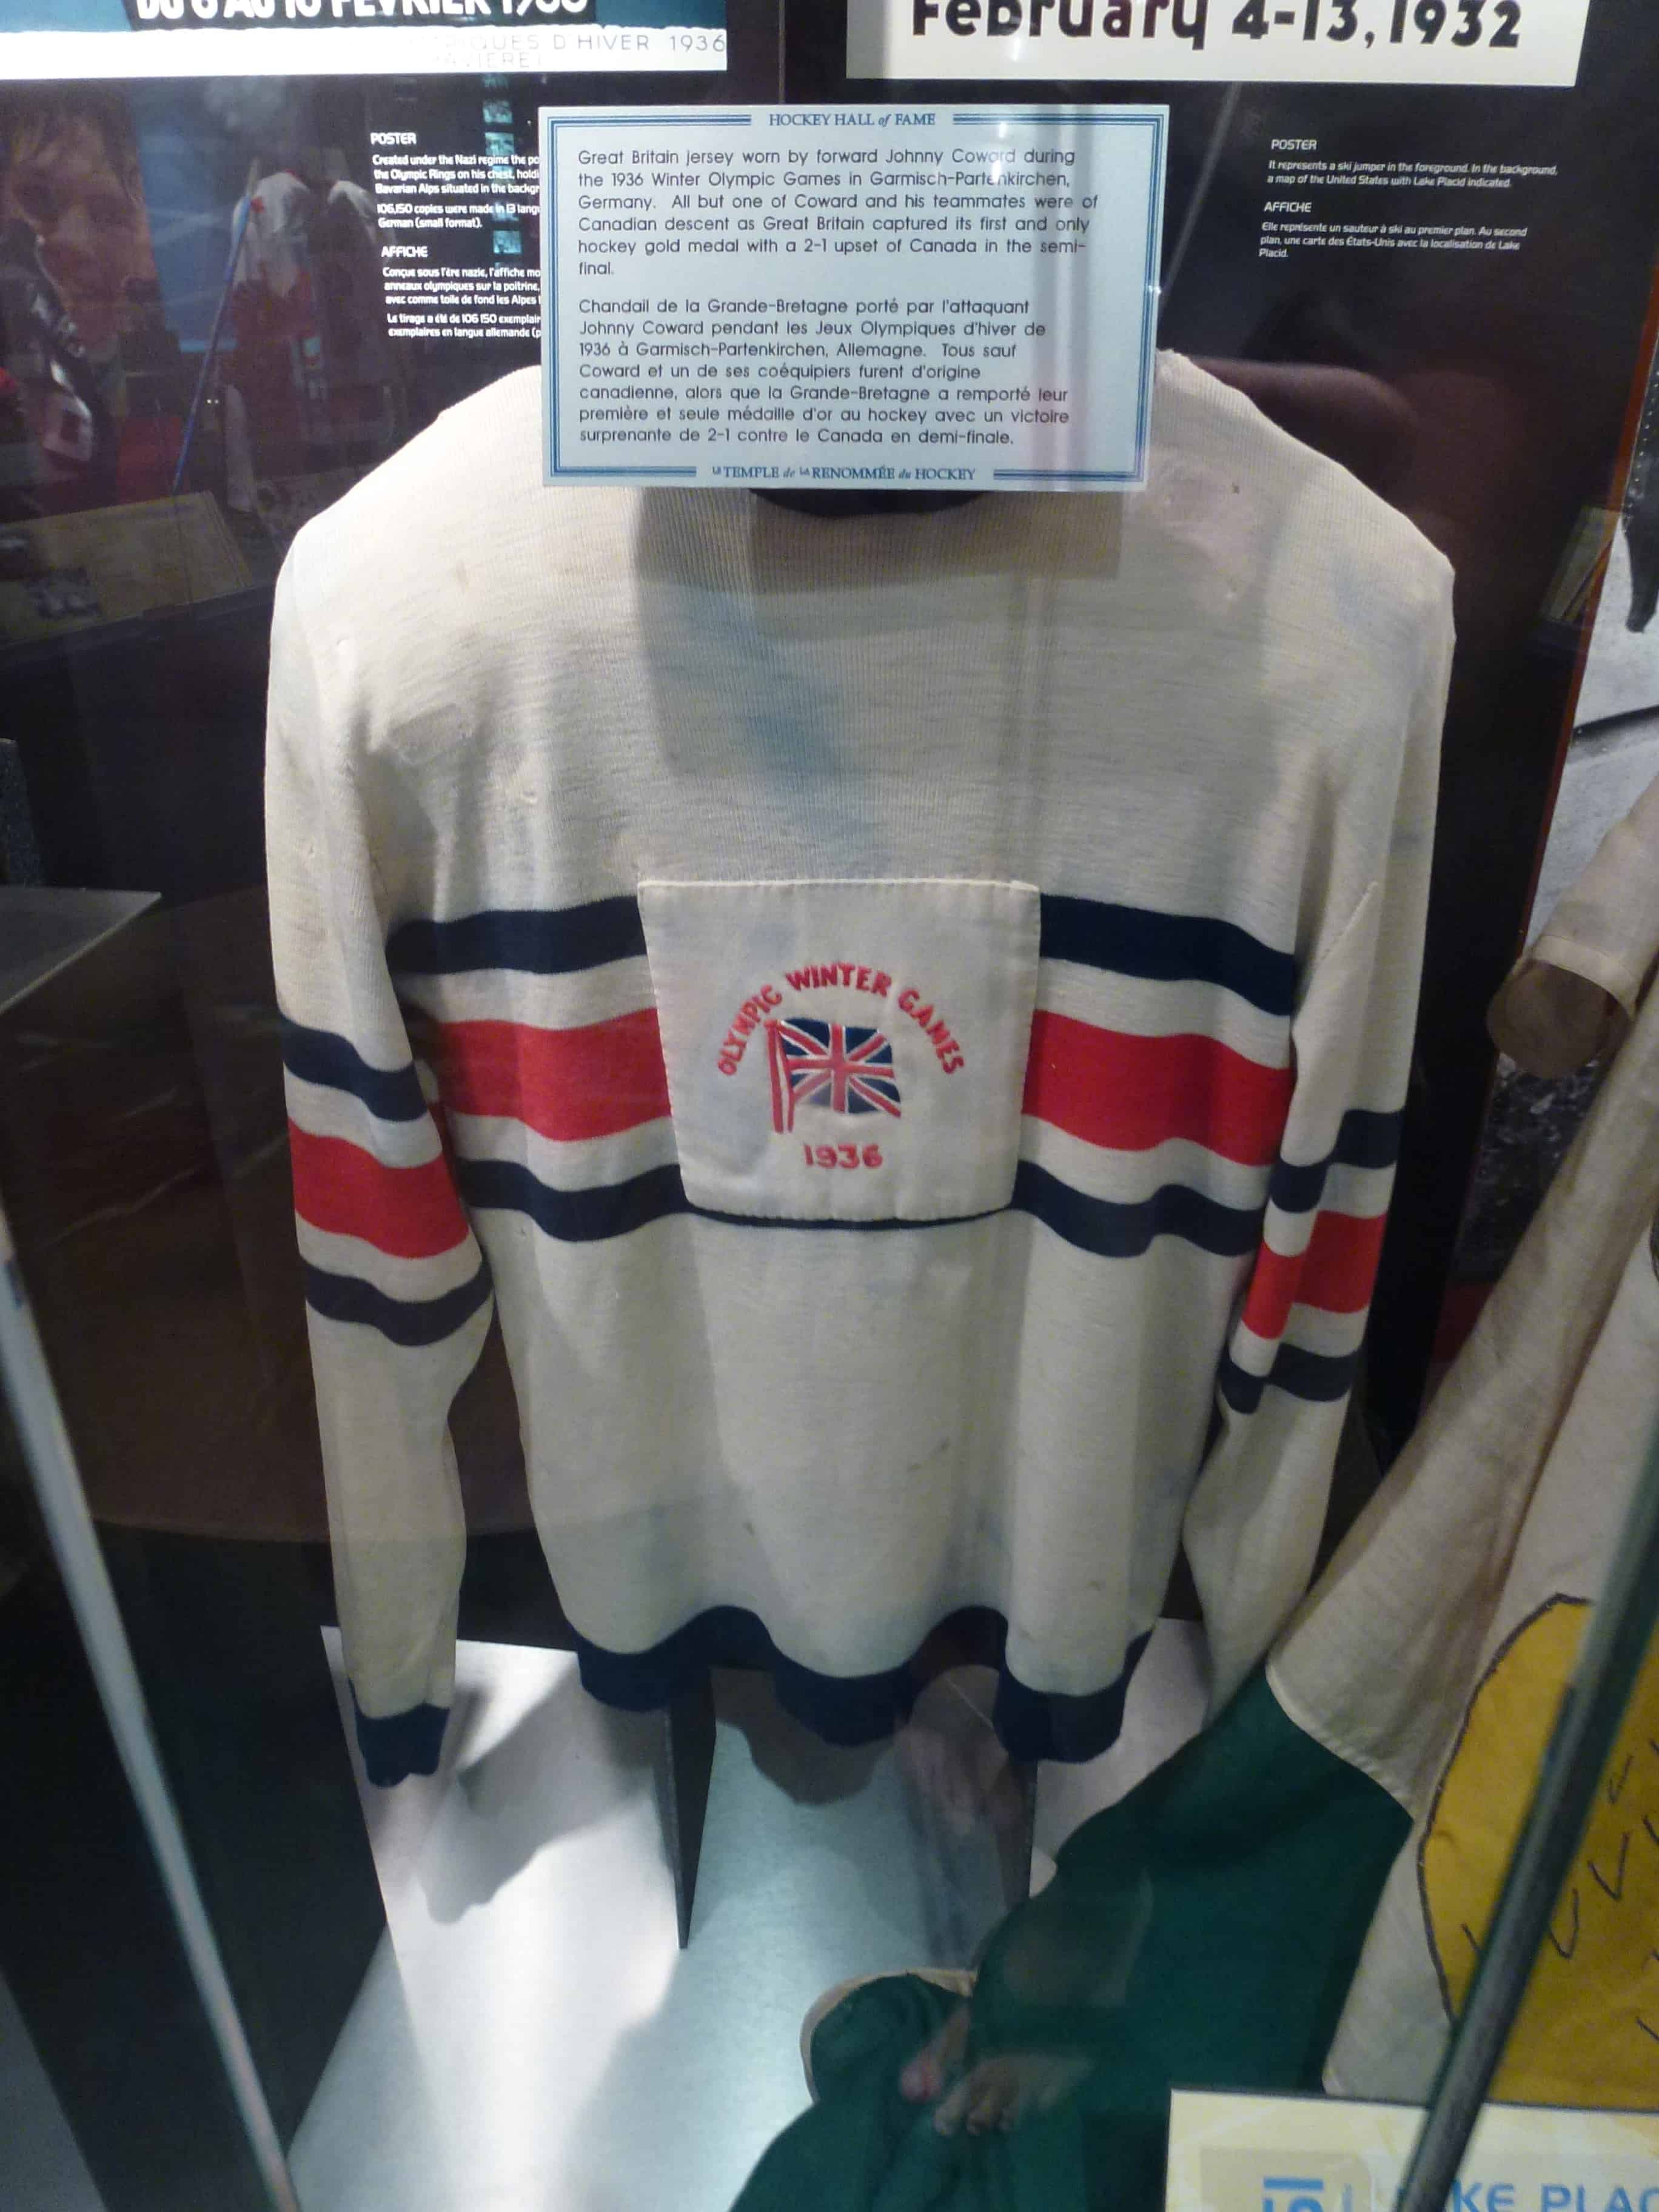 Great Britain 1936 gold medal winning team jersey at the Hockey Hall of Fame in Toronto, Ontario, Canada